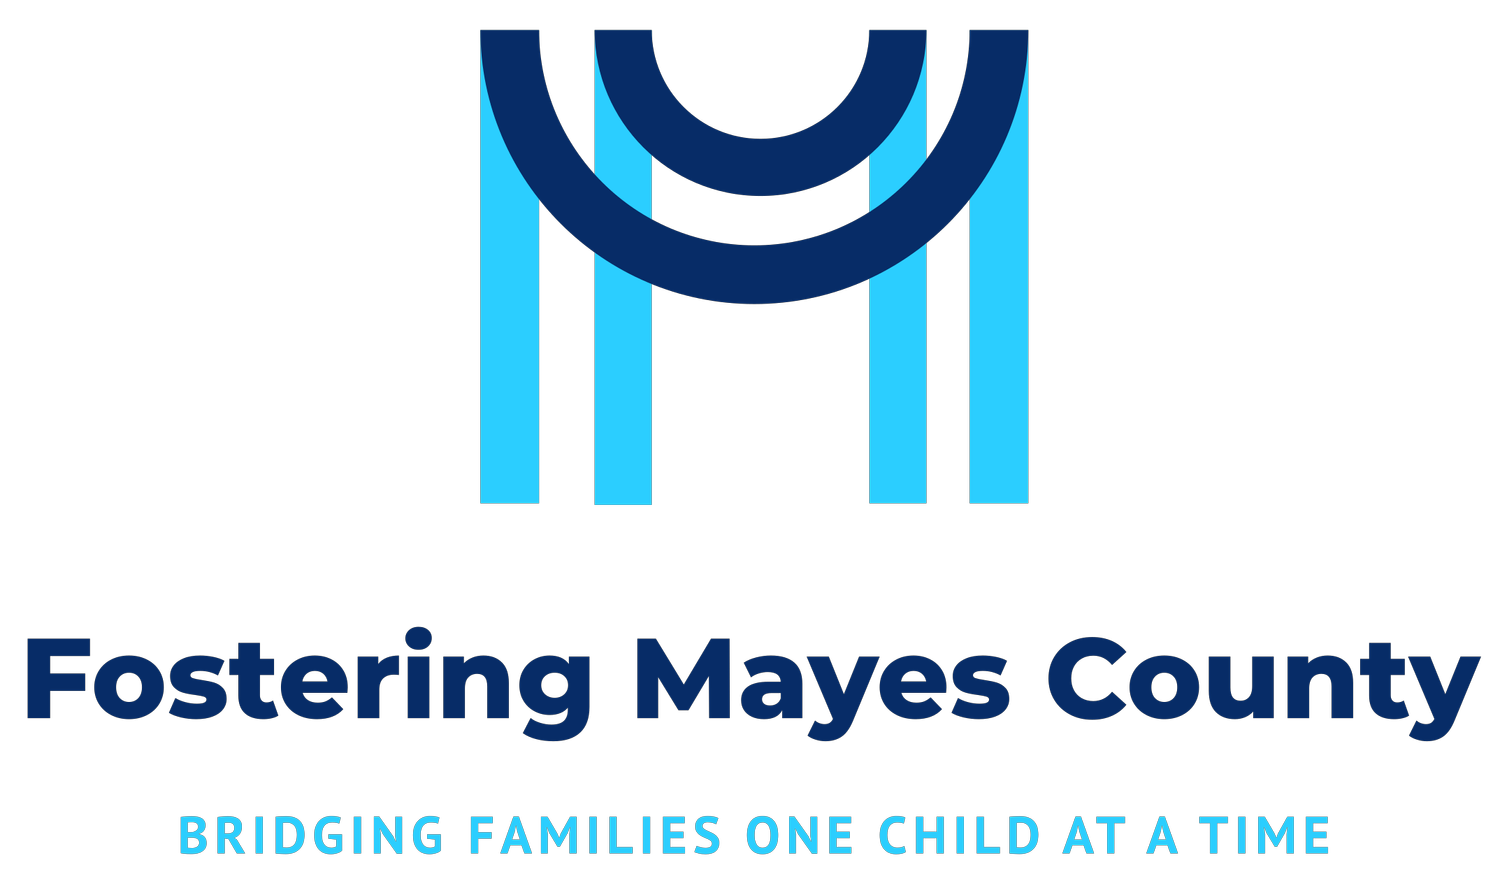 Fostering Mayes County